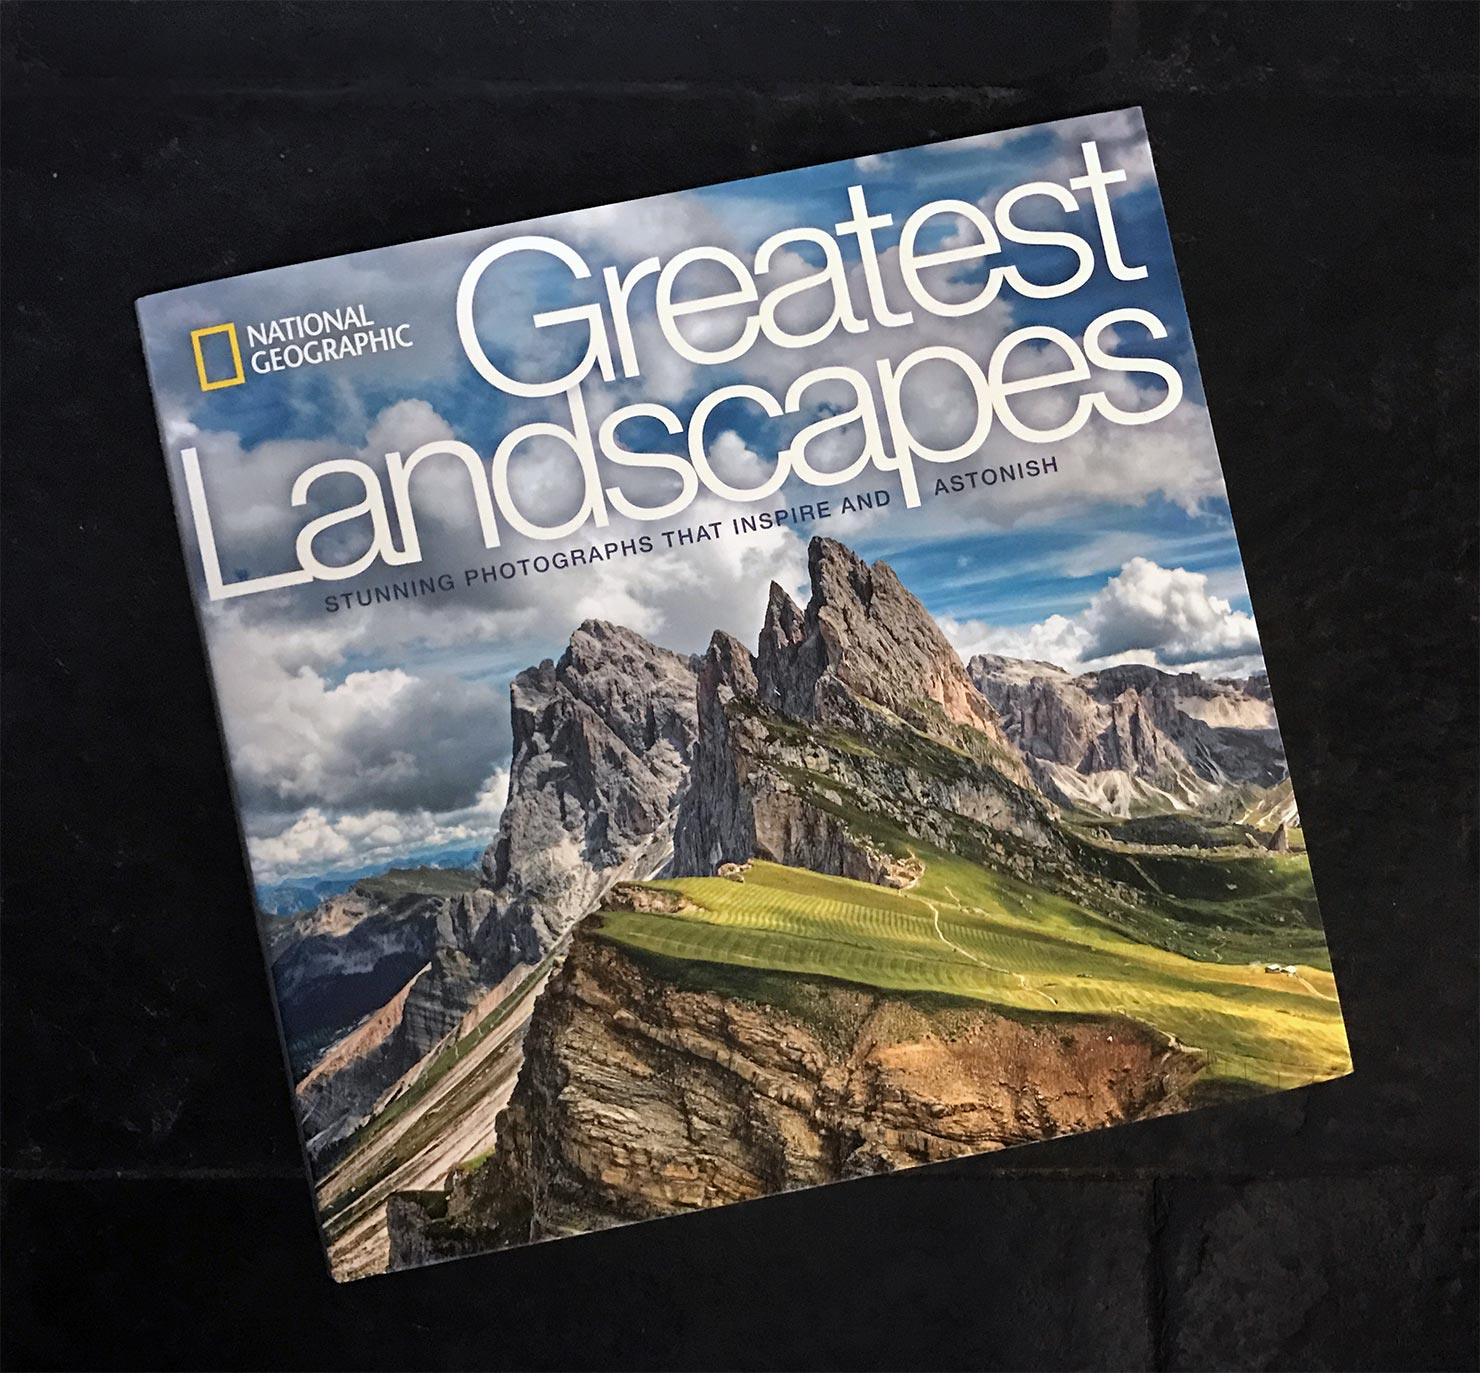 national geographic book the worlds greatest landscapes 2016 paul reiffer photographer preview photography fine art limited edition wanaka tree new zealand nz